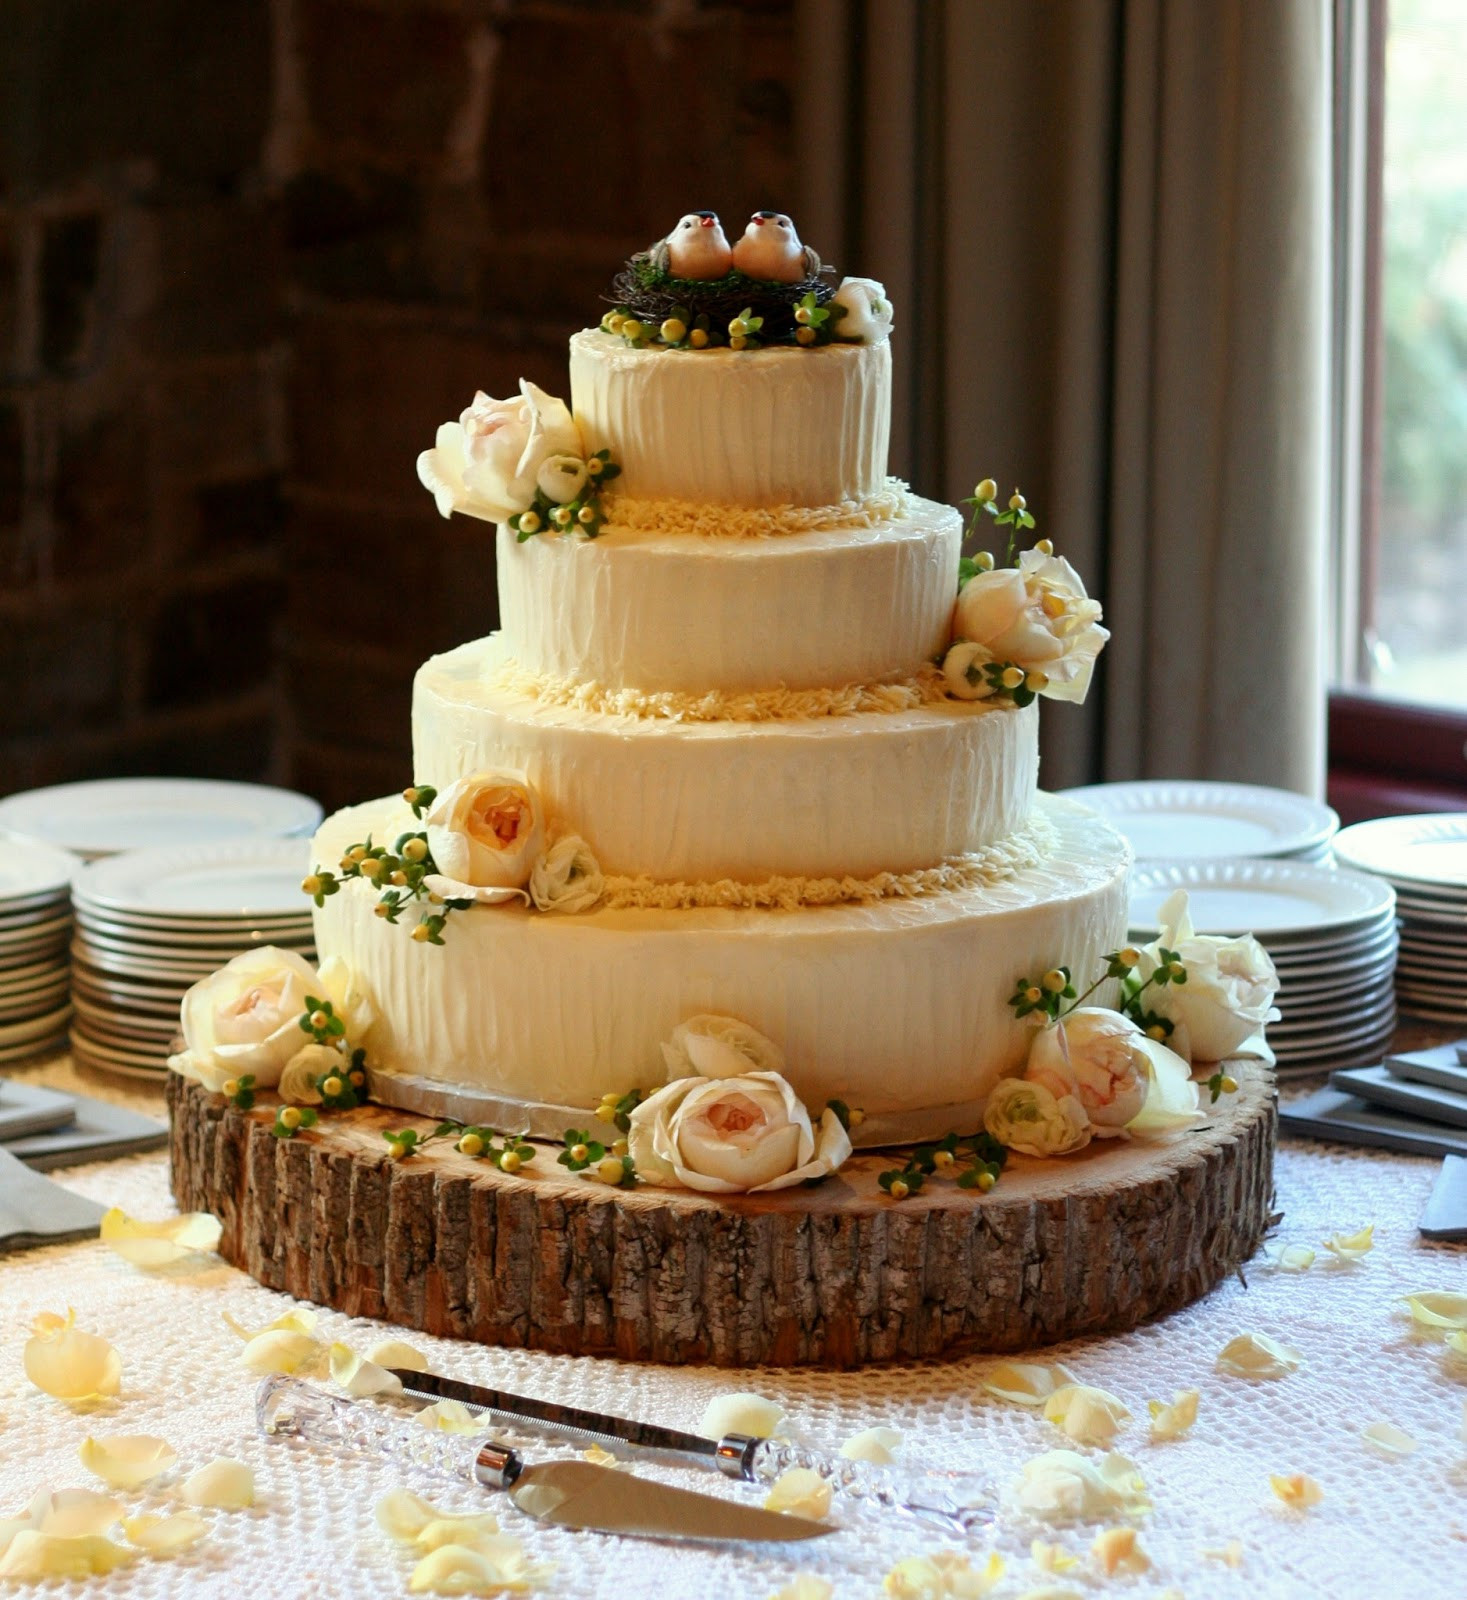 Rustic Wedding Cakes Pictures
 6 Stunning Rustic Wedding Cake Ideas Wedding Cakes